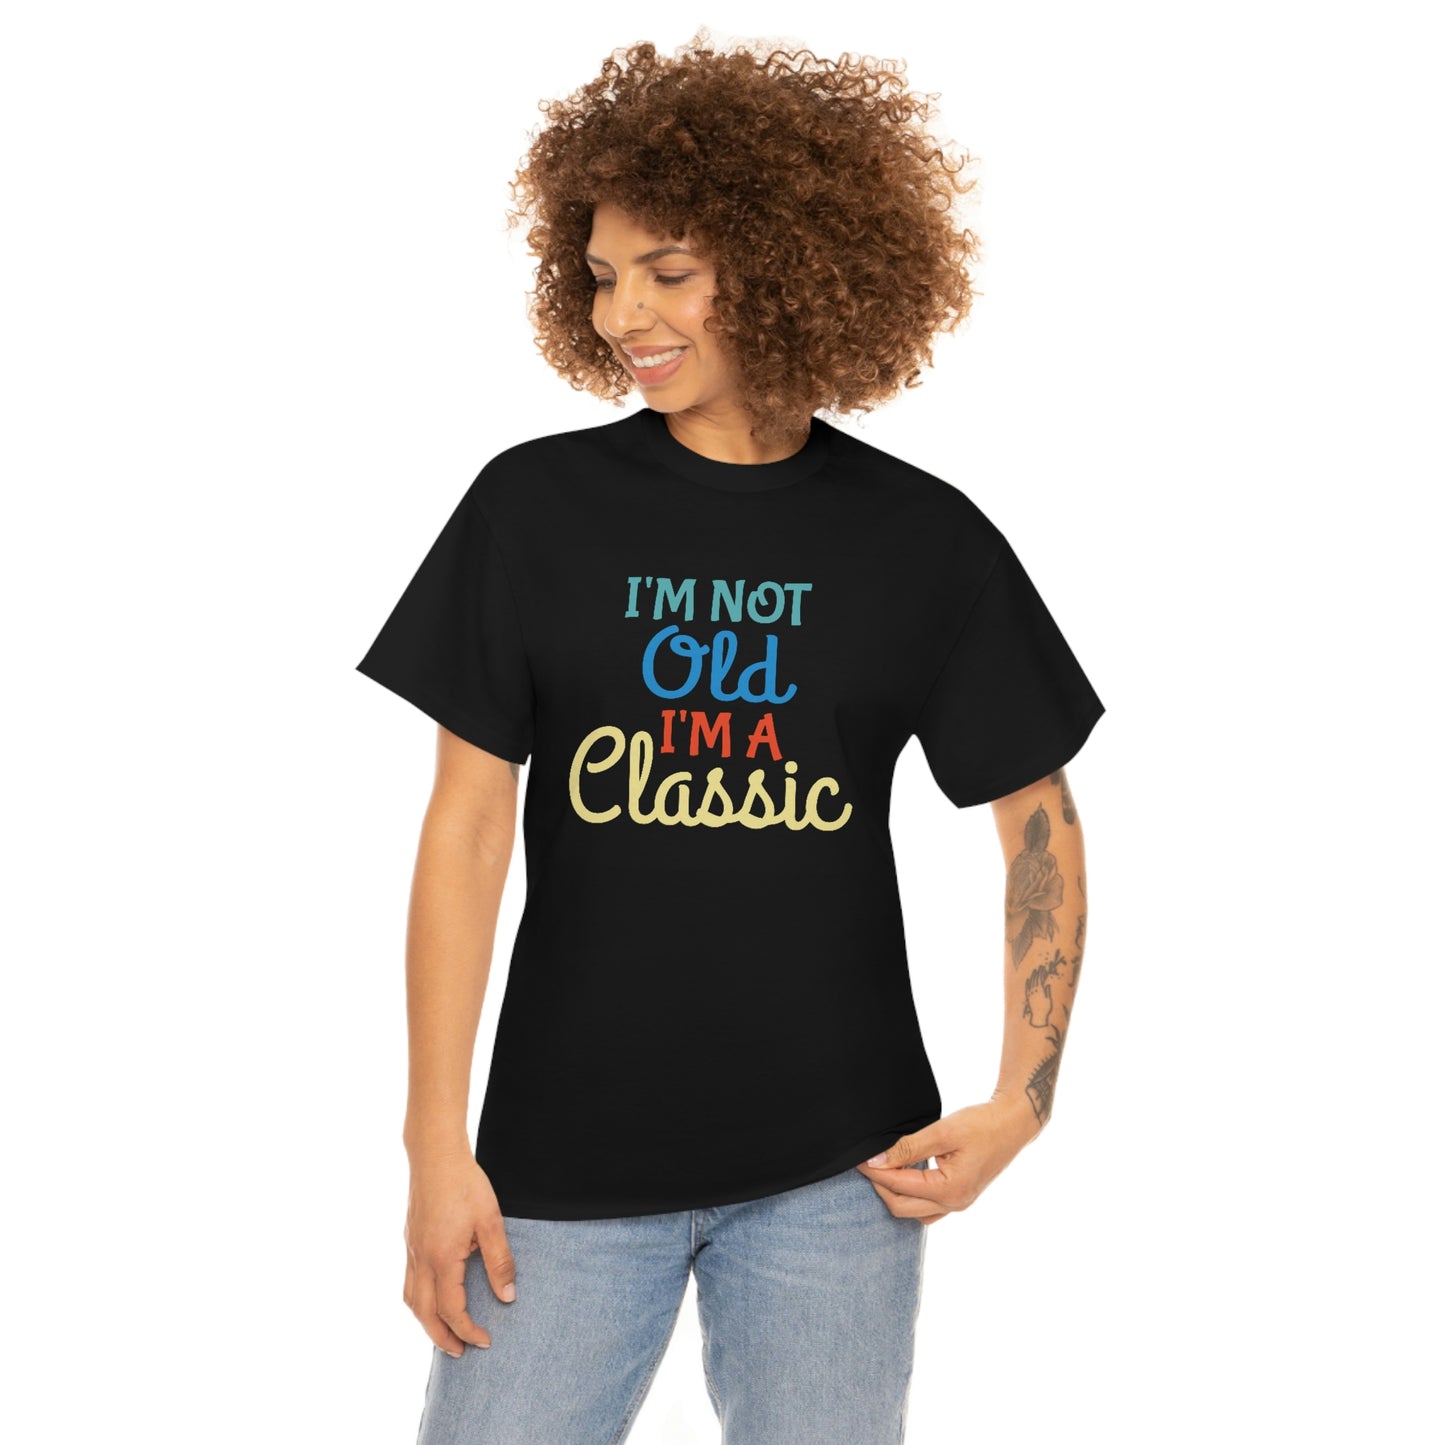 I’m not old I’m a classic- Heavy Cotton Tee